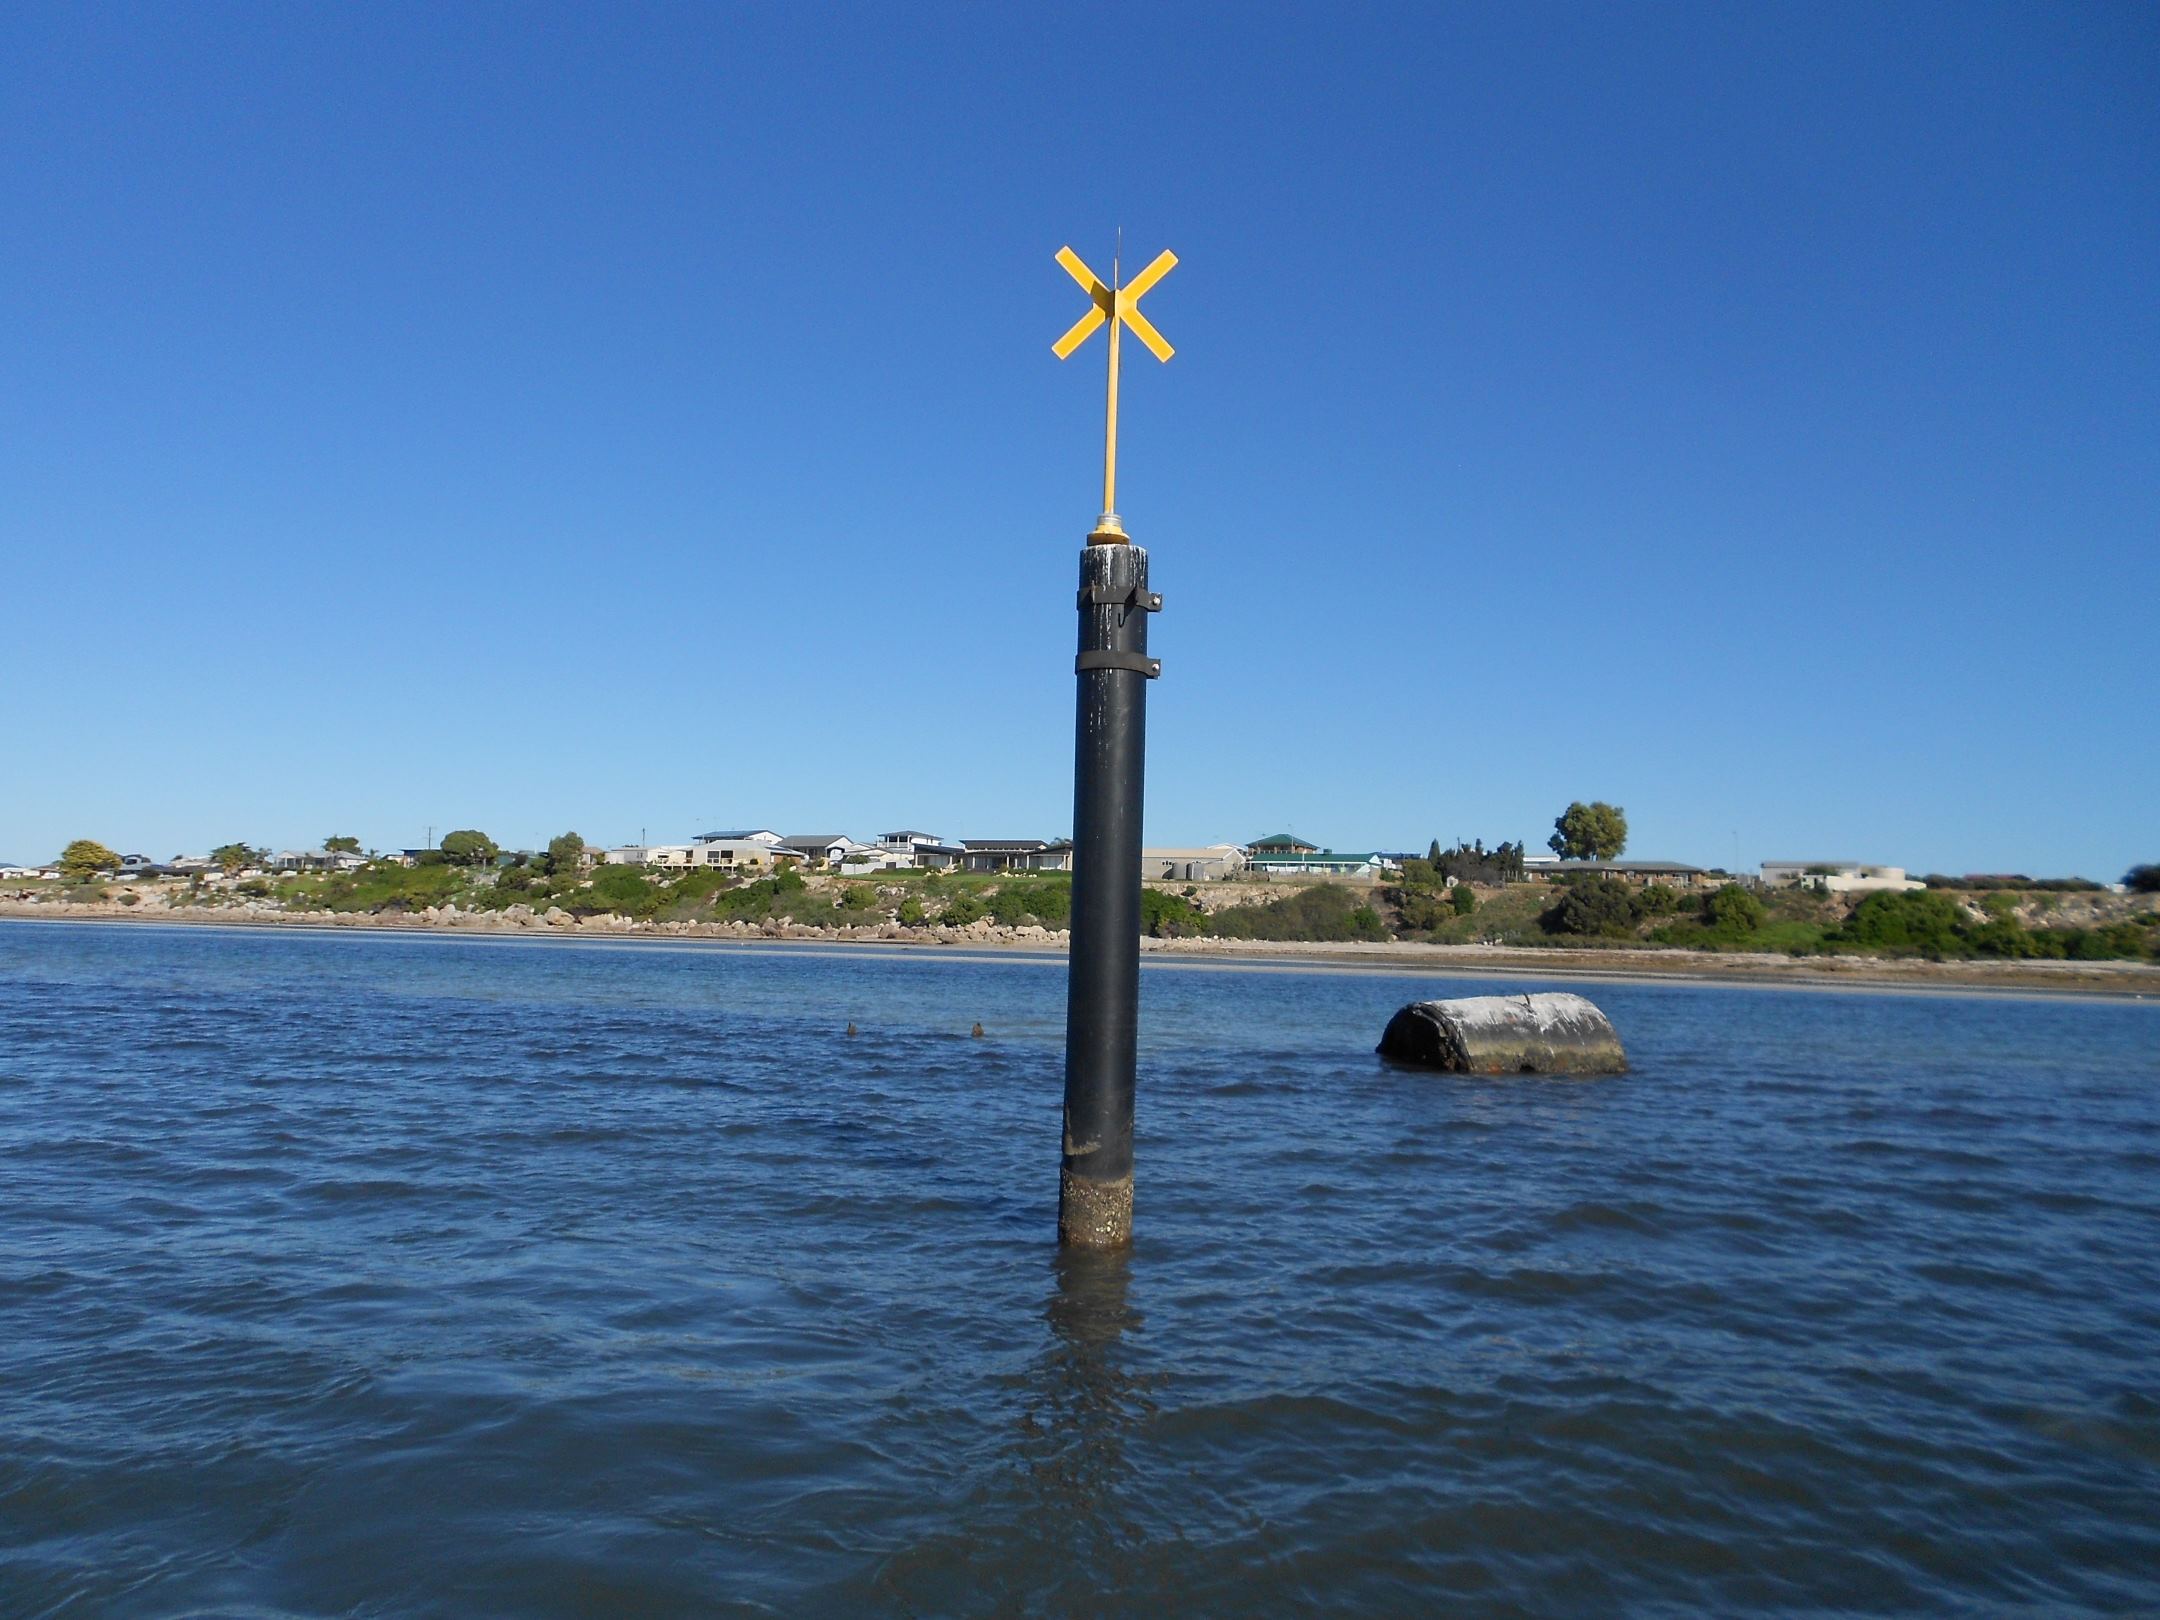 Special mark yellow cross on a pole near the Yulta wreck at Point Turton